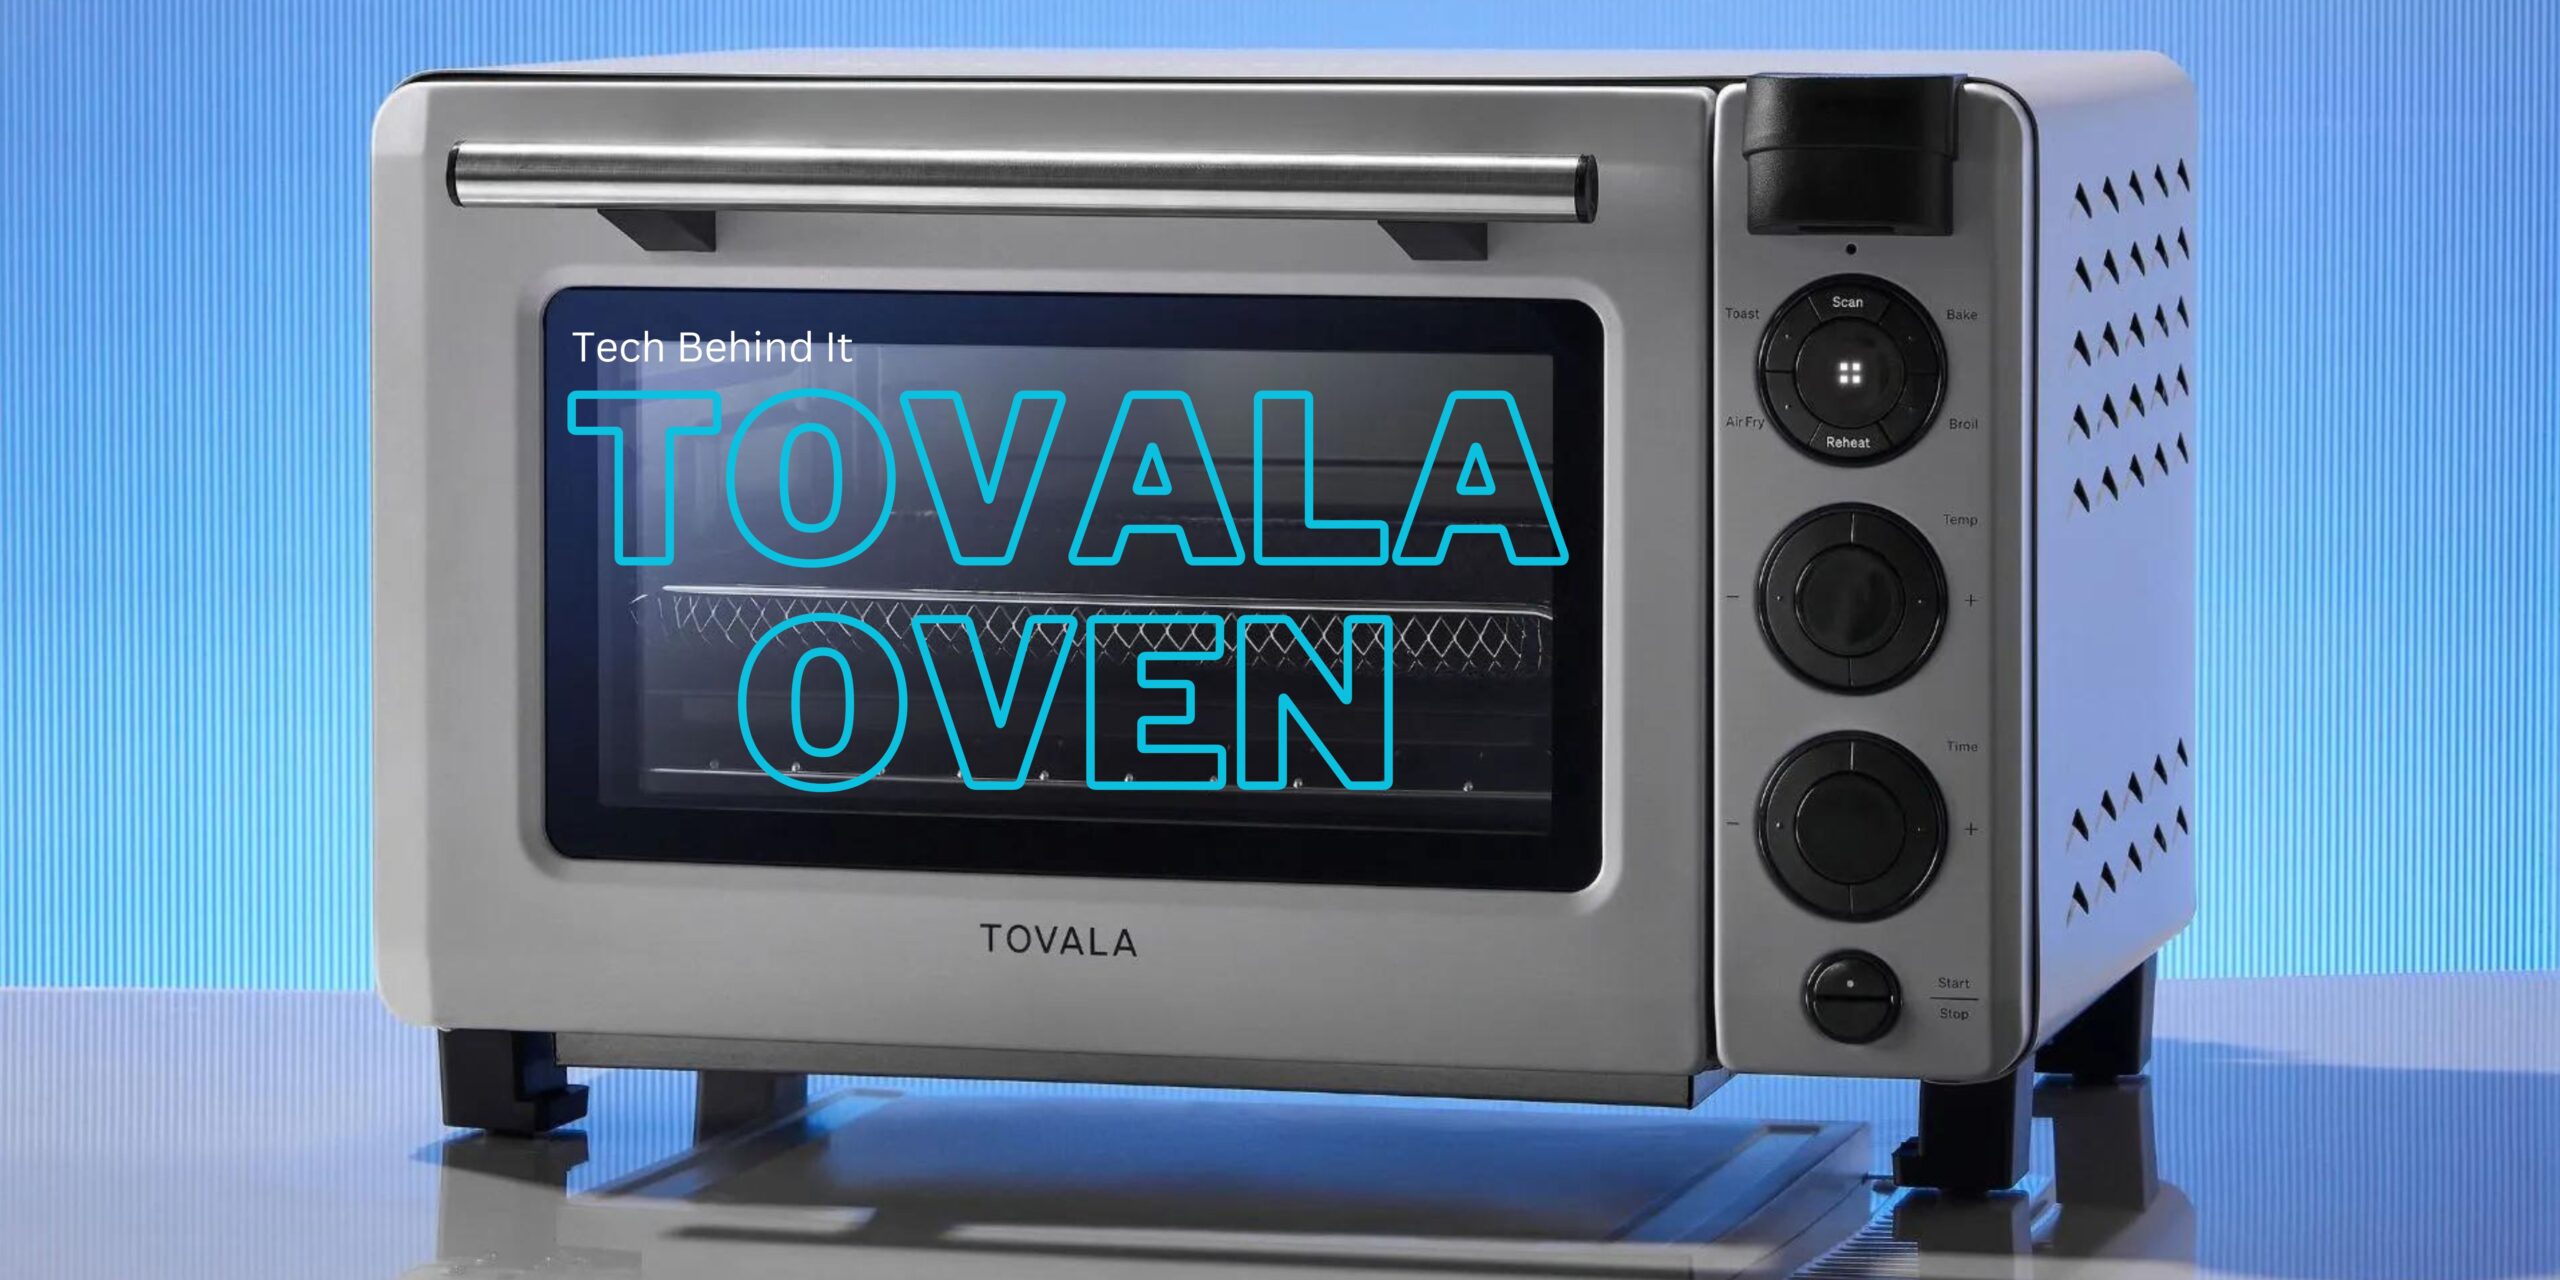 Cooking Revolution in Smart Home Cooking with Tovala Ovens and Meal Kits